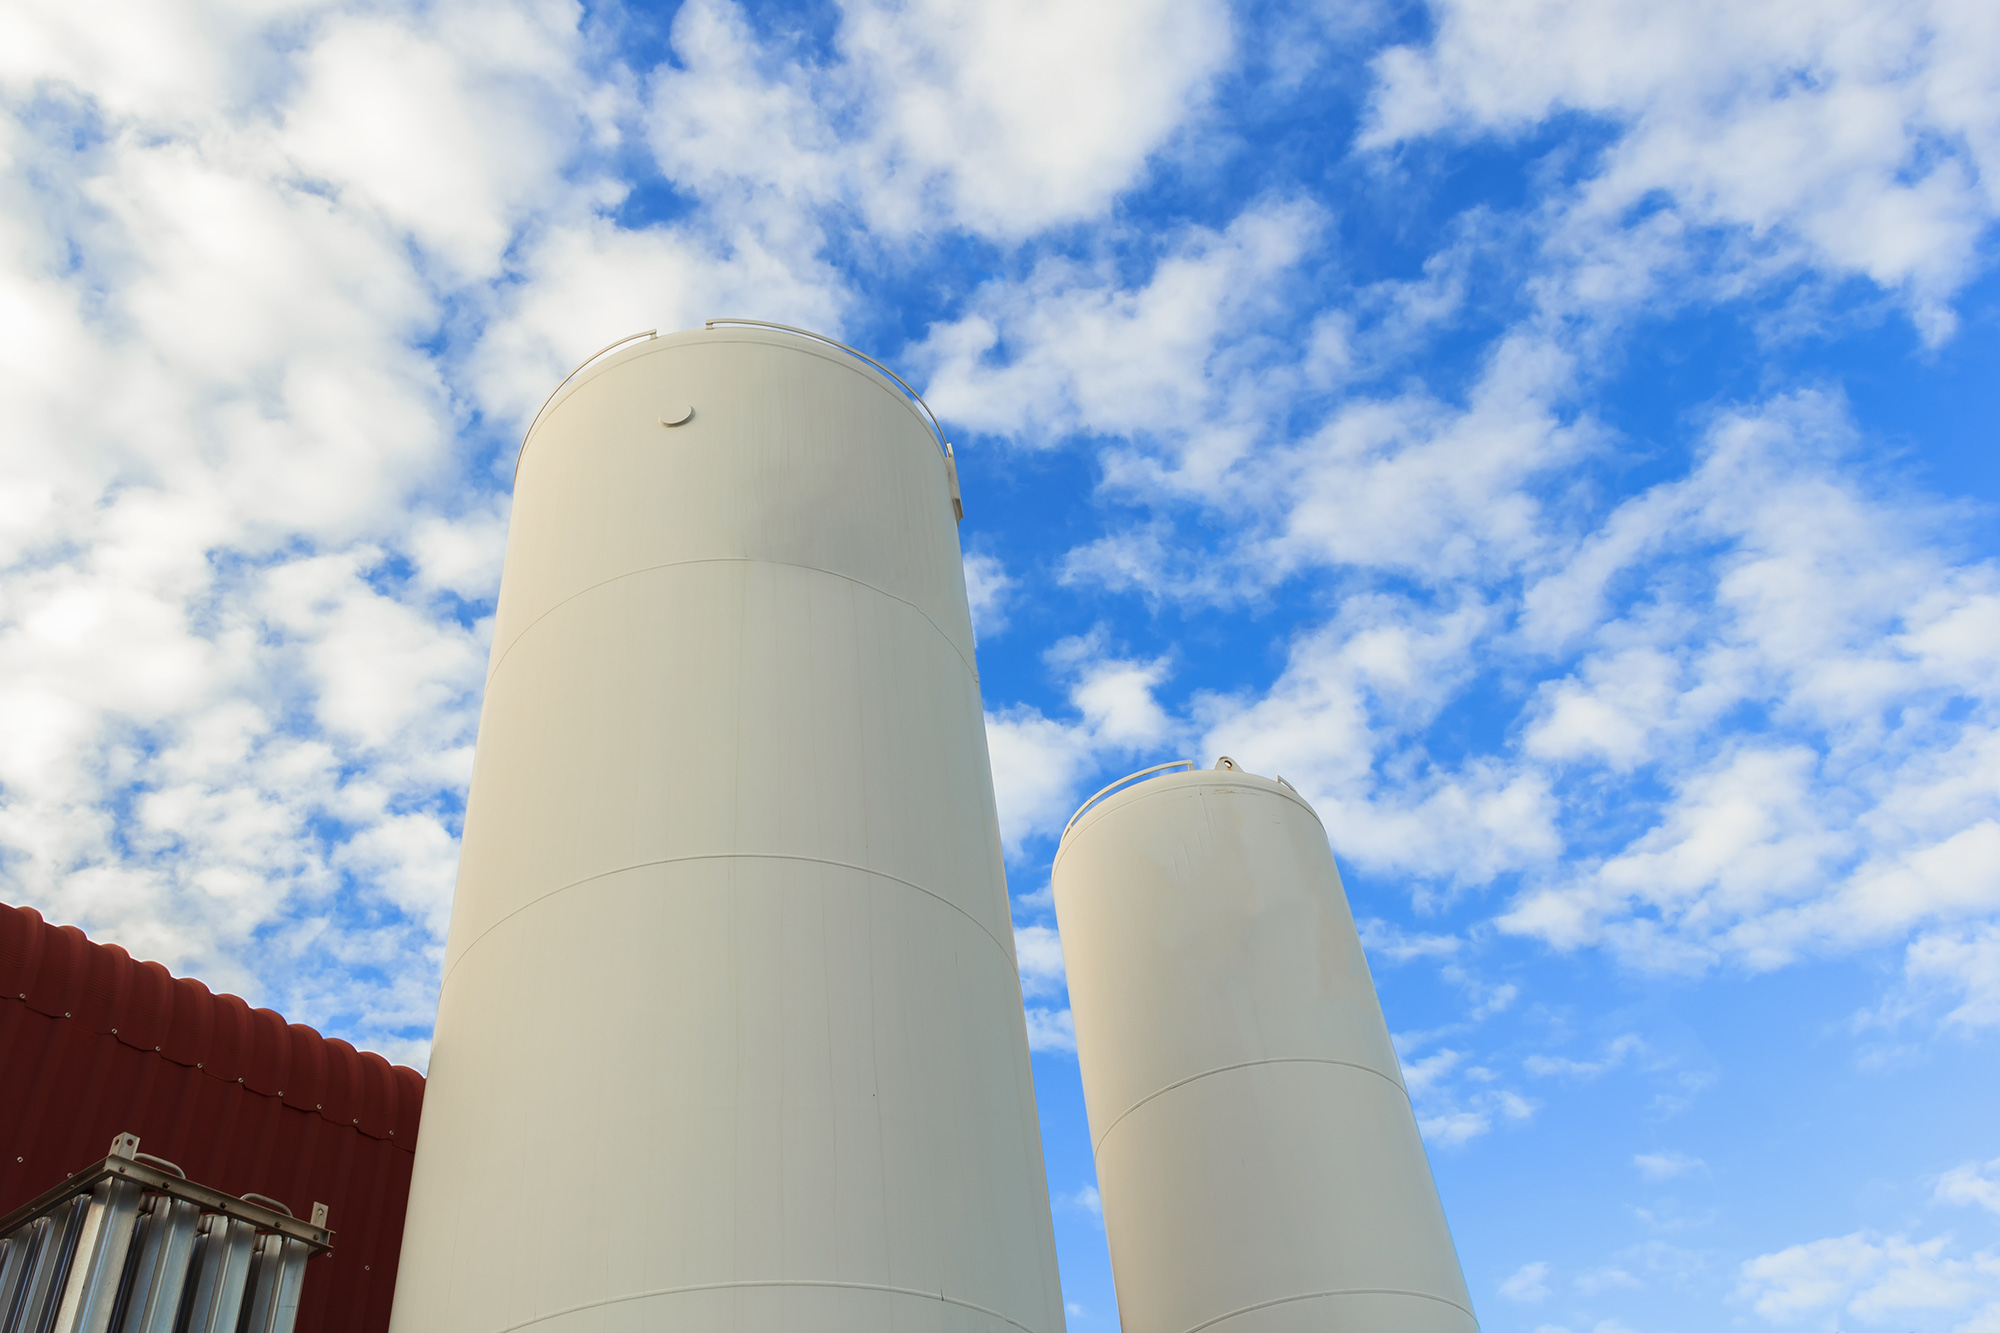 carbon capture and storage company